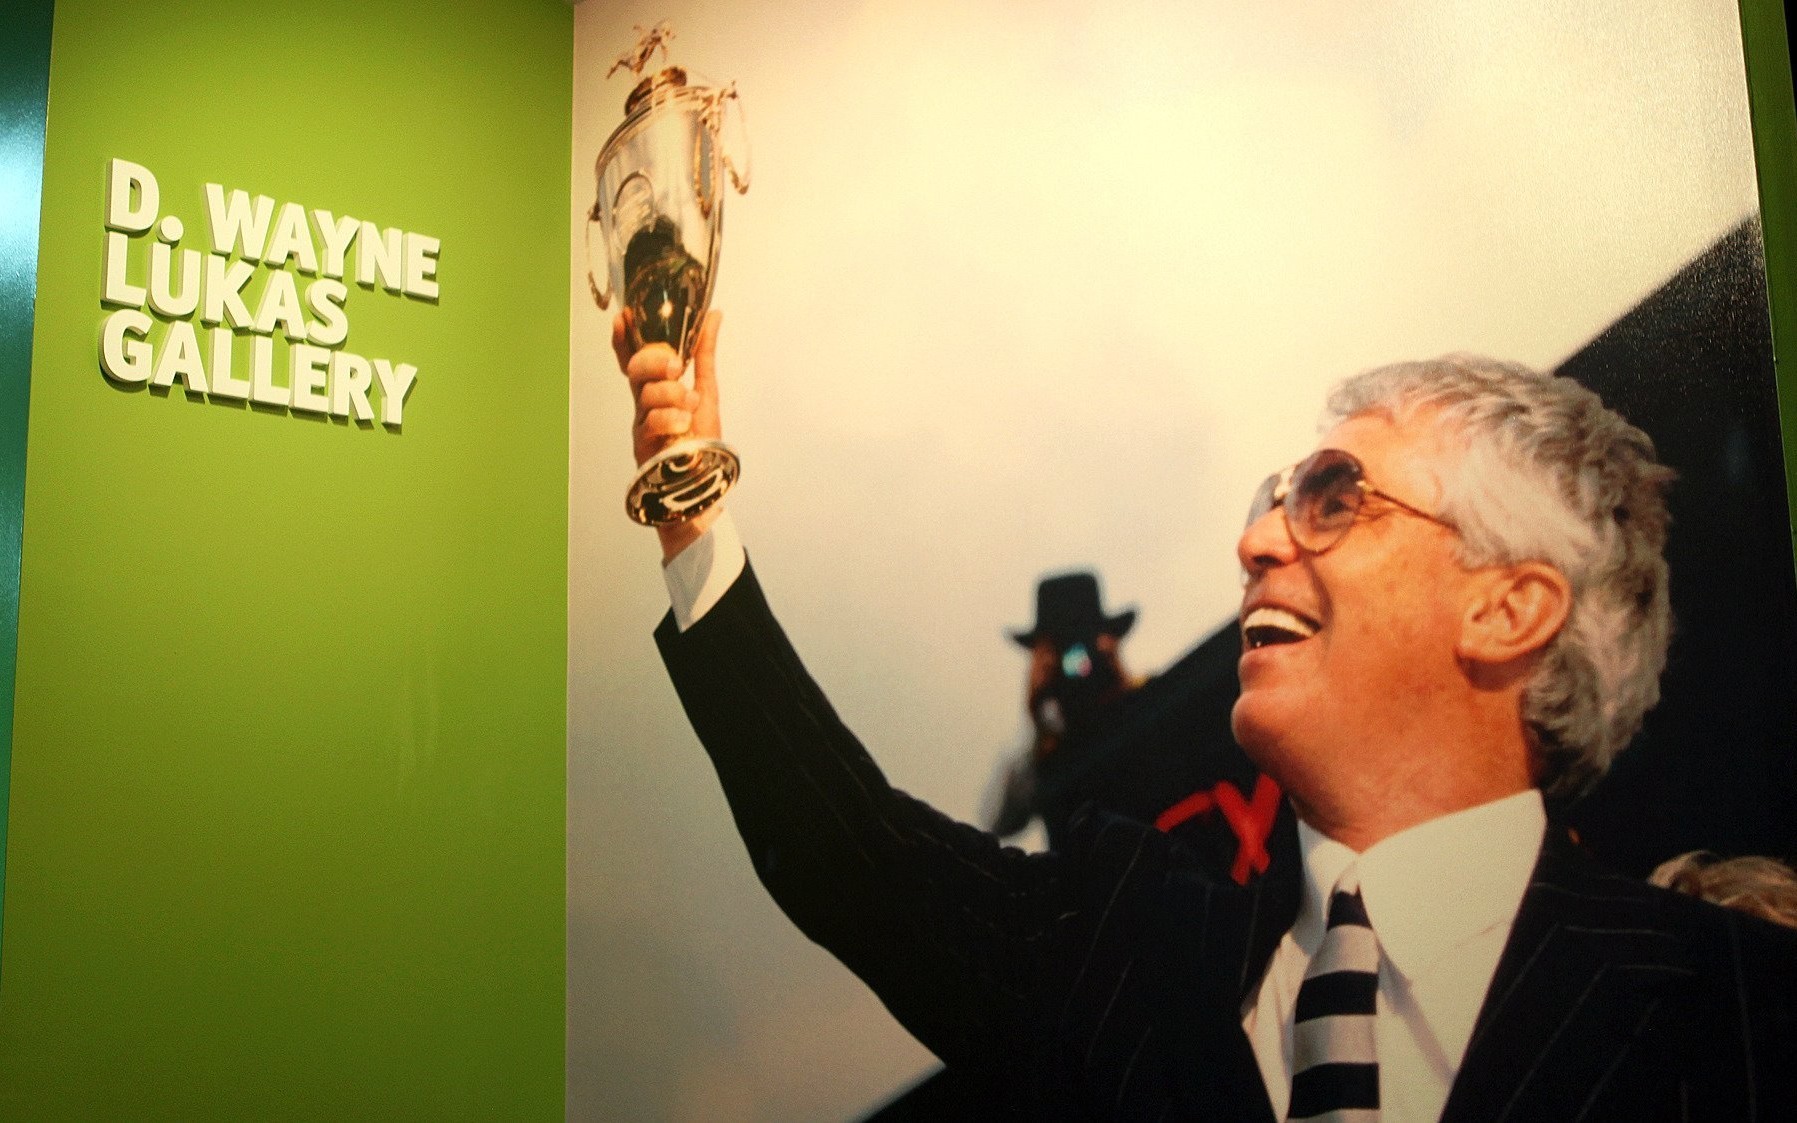 Kentucky Derby Museum Announces Naming Of The D. Wayne Lukas Gallery